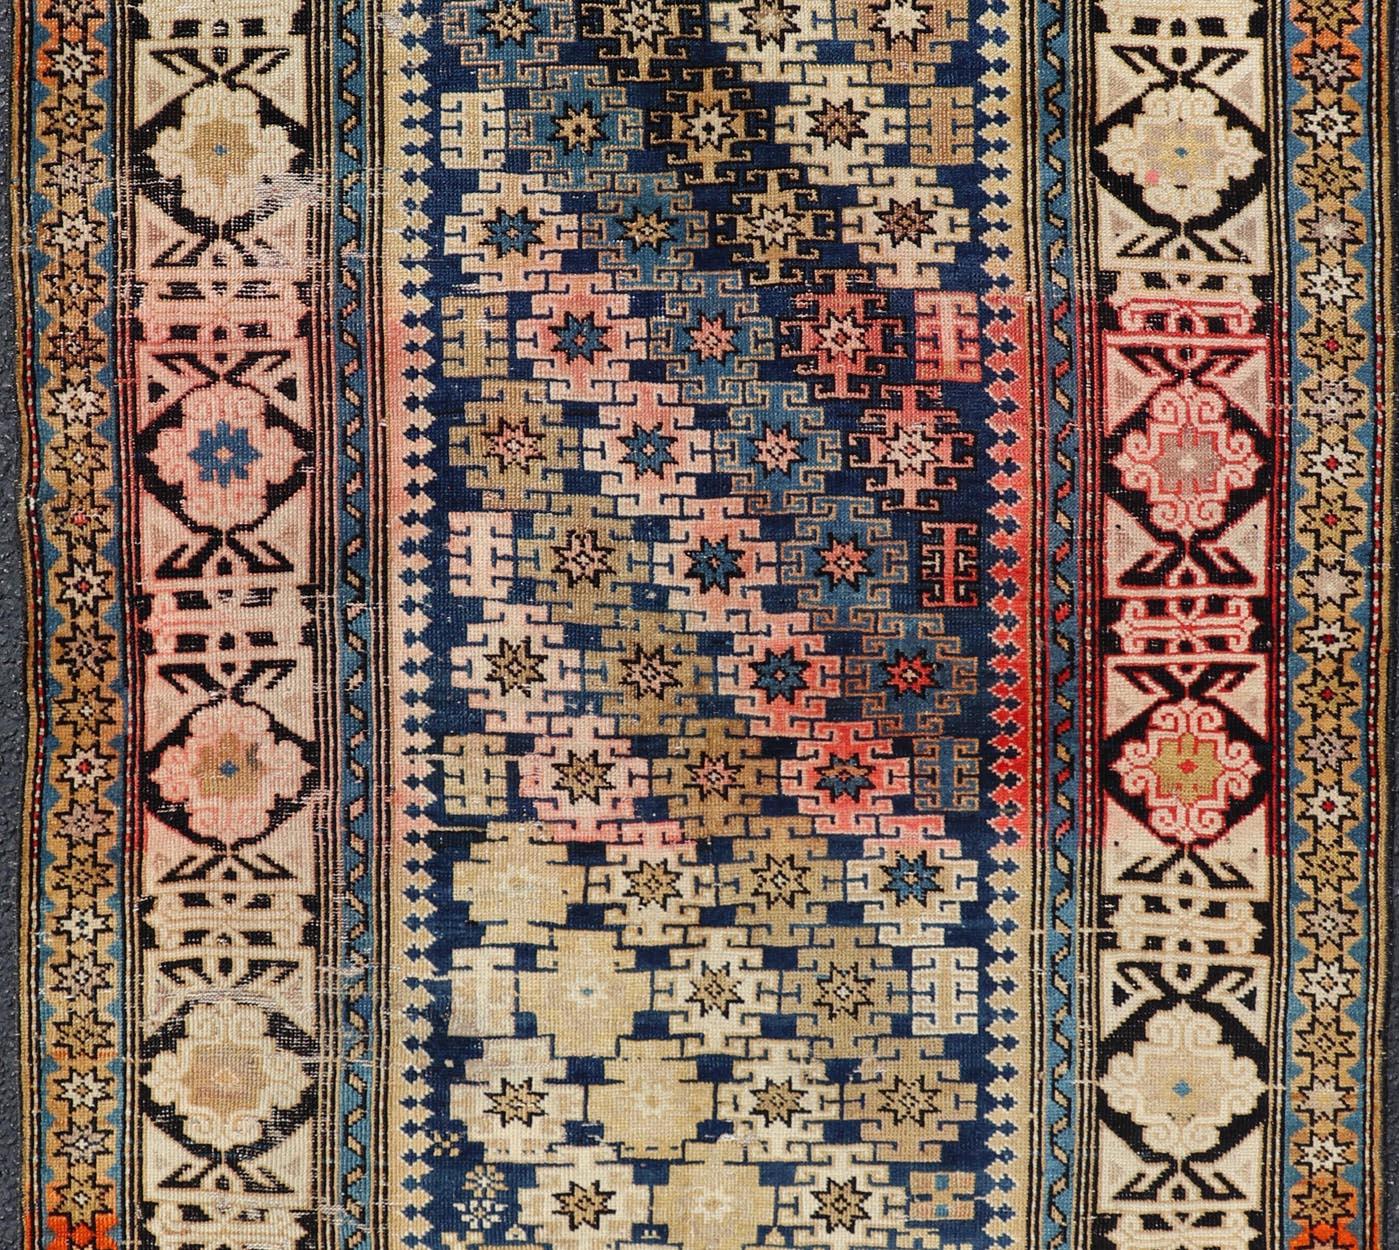 Antique Caucasian Shirvan rug with all-over blossoming tribal motifs. Keivan Woven Arts / rug V21-0102, country of origin / type: Caucasus / Shirvan, circa 1880
Measures: 3'0 x 4'10 
This colorful blossom carpet from Shirvan features an all-over